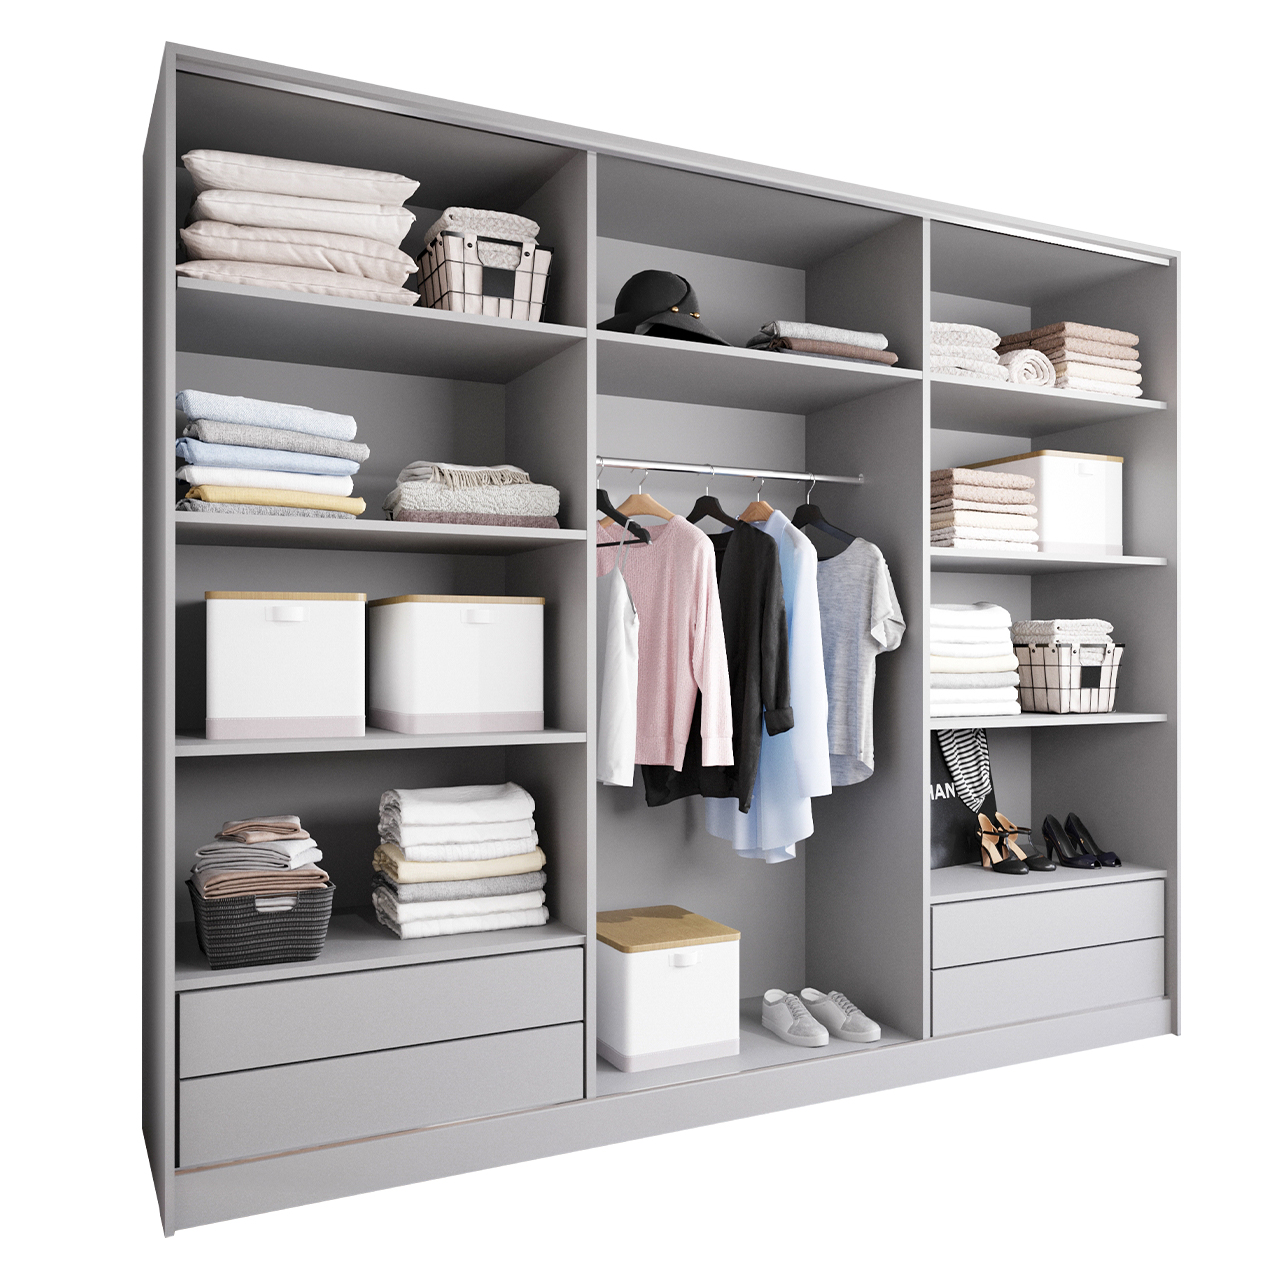 Sliding Wardrobe with Mirror and Drawers GRANO C 270 grey